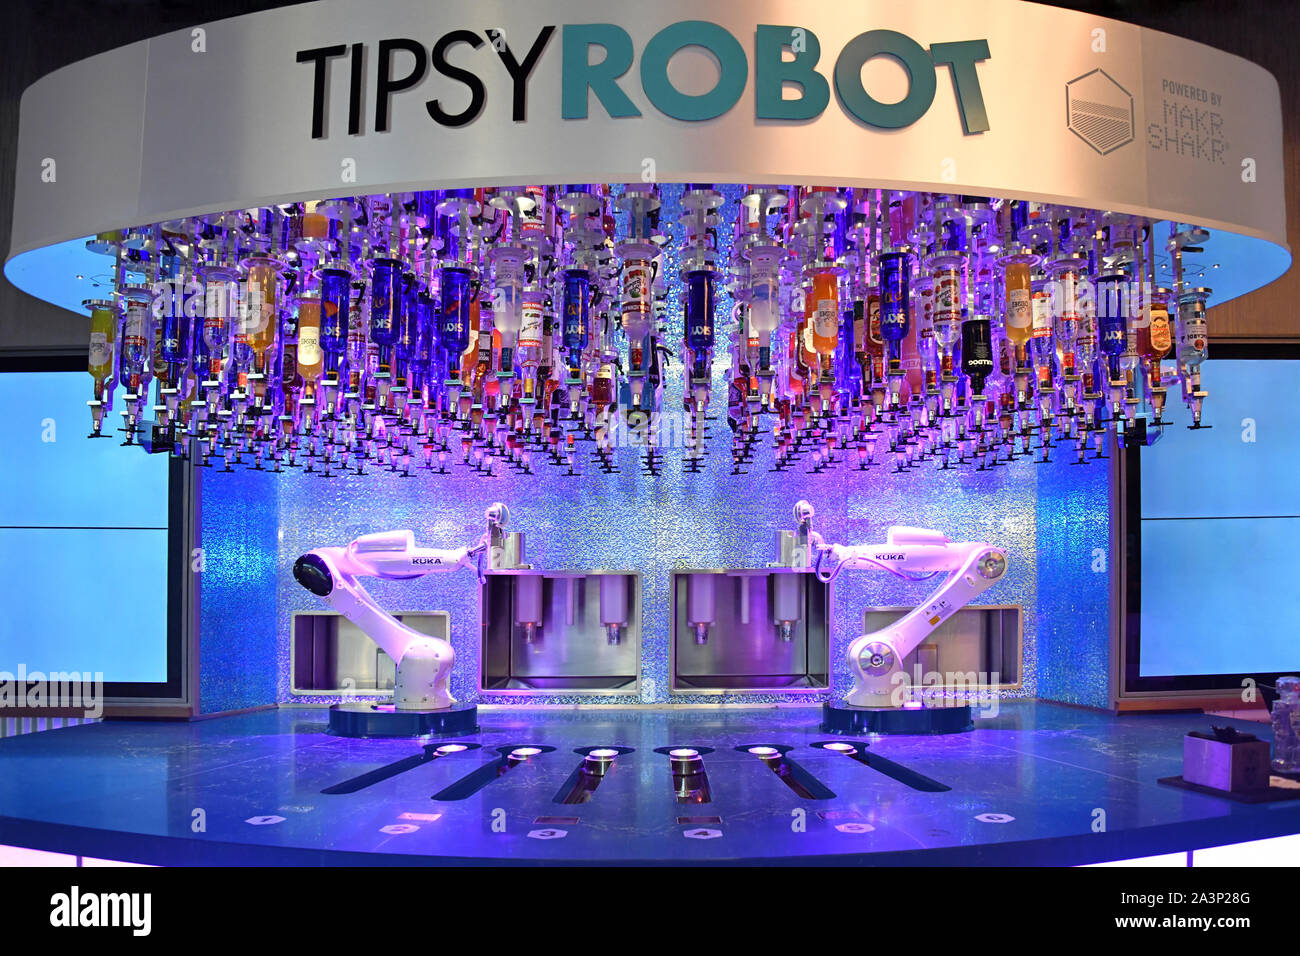 The Tipsy Robot at Planet Hollywood, Las Vegas Nevada USA October 3, 2018  The robots replace the bartenders Stock Photo - Alamy